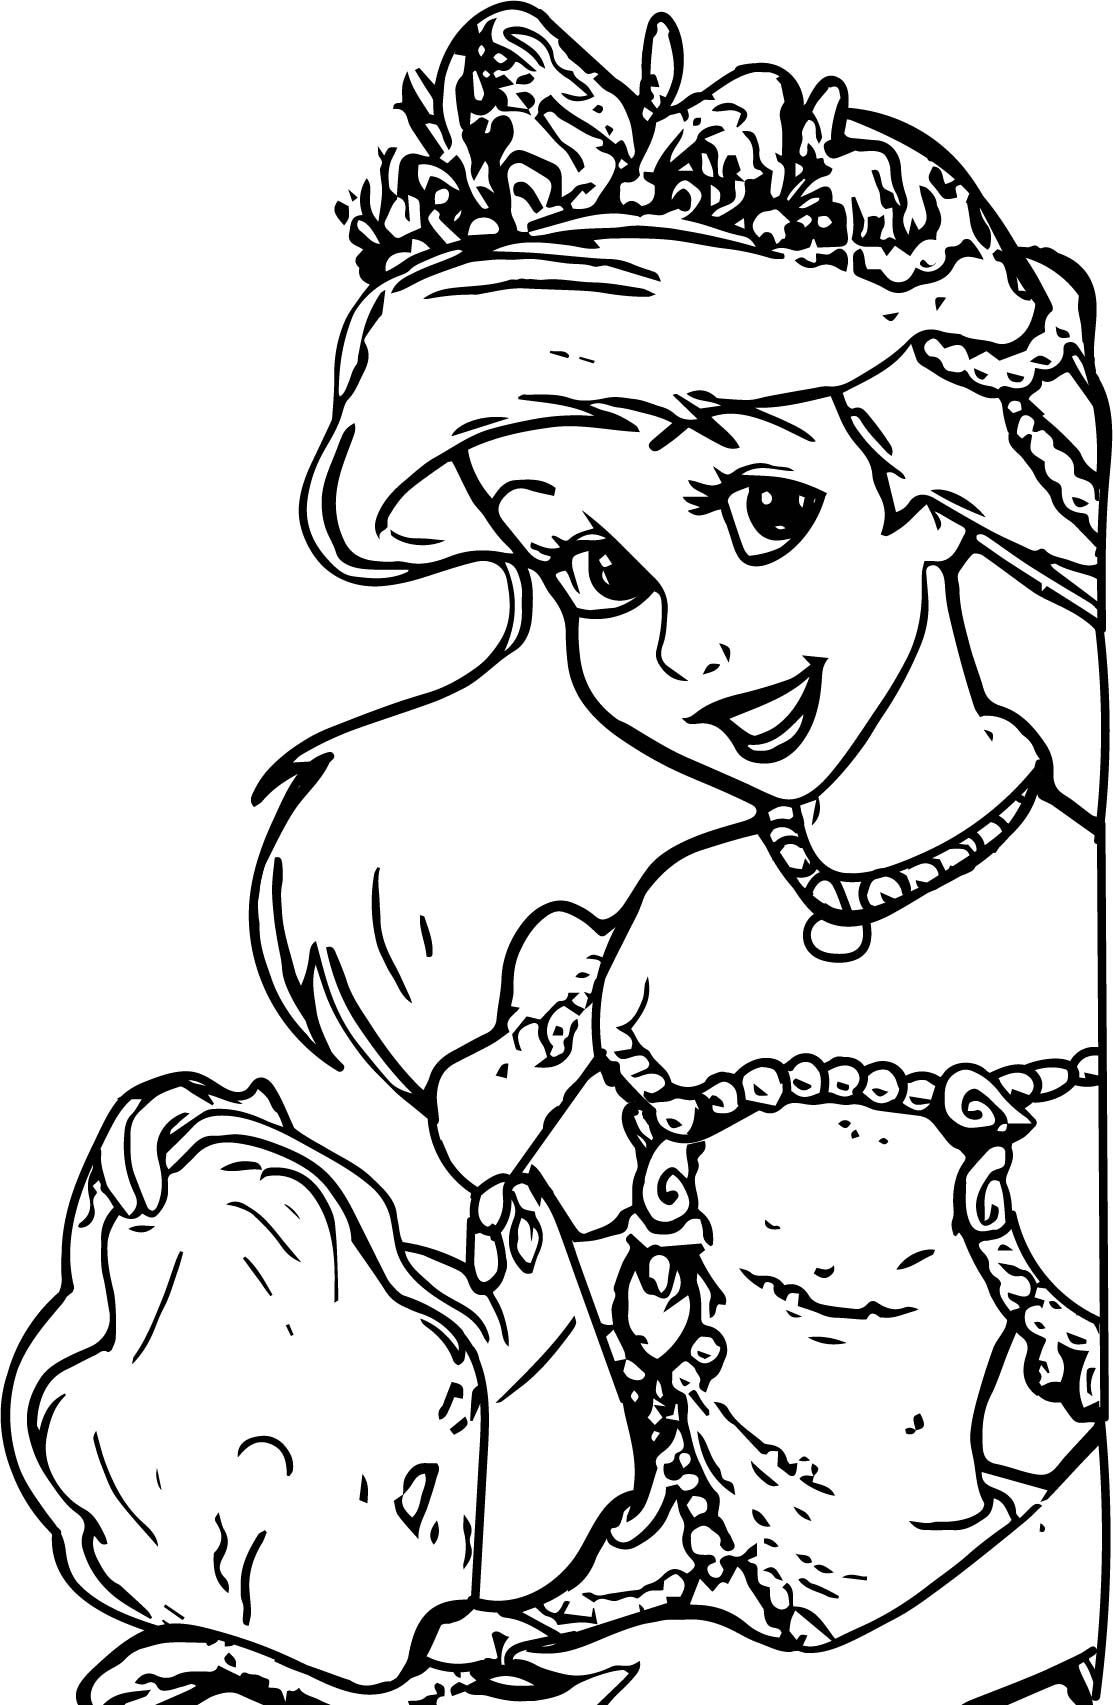 Baby Disney Princesses Coloring Pages at GetColorings.com | Free